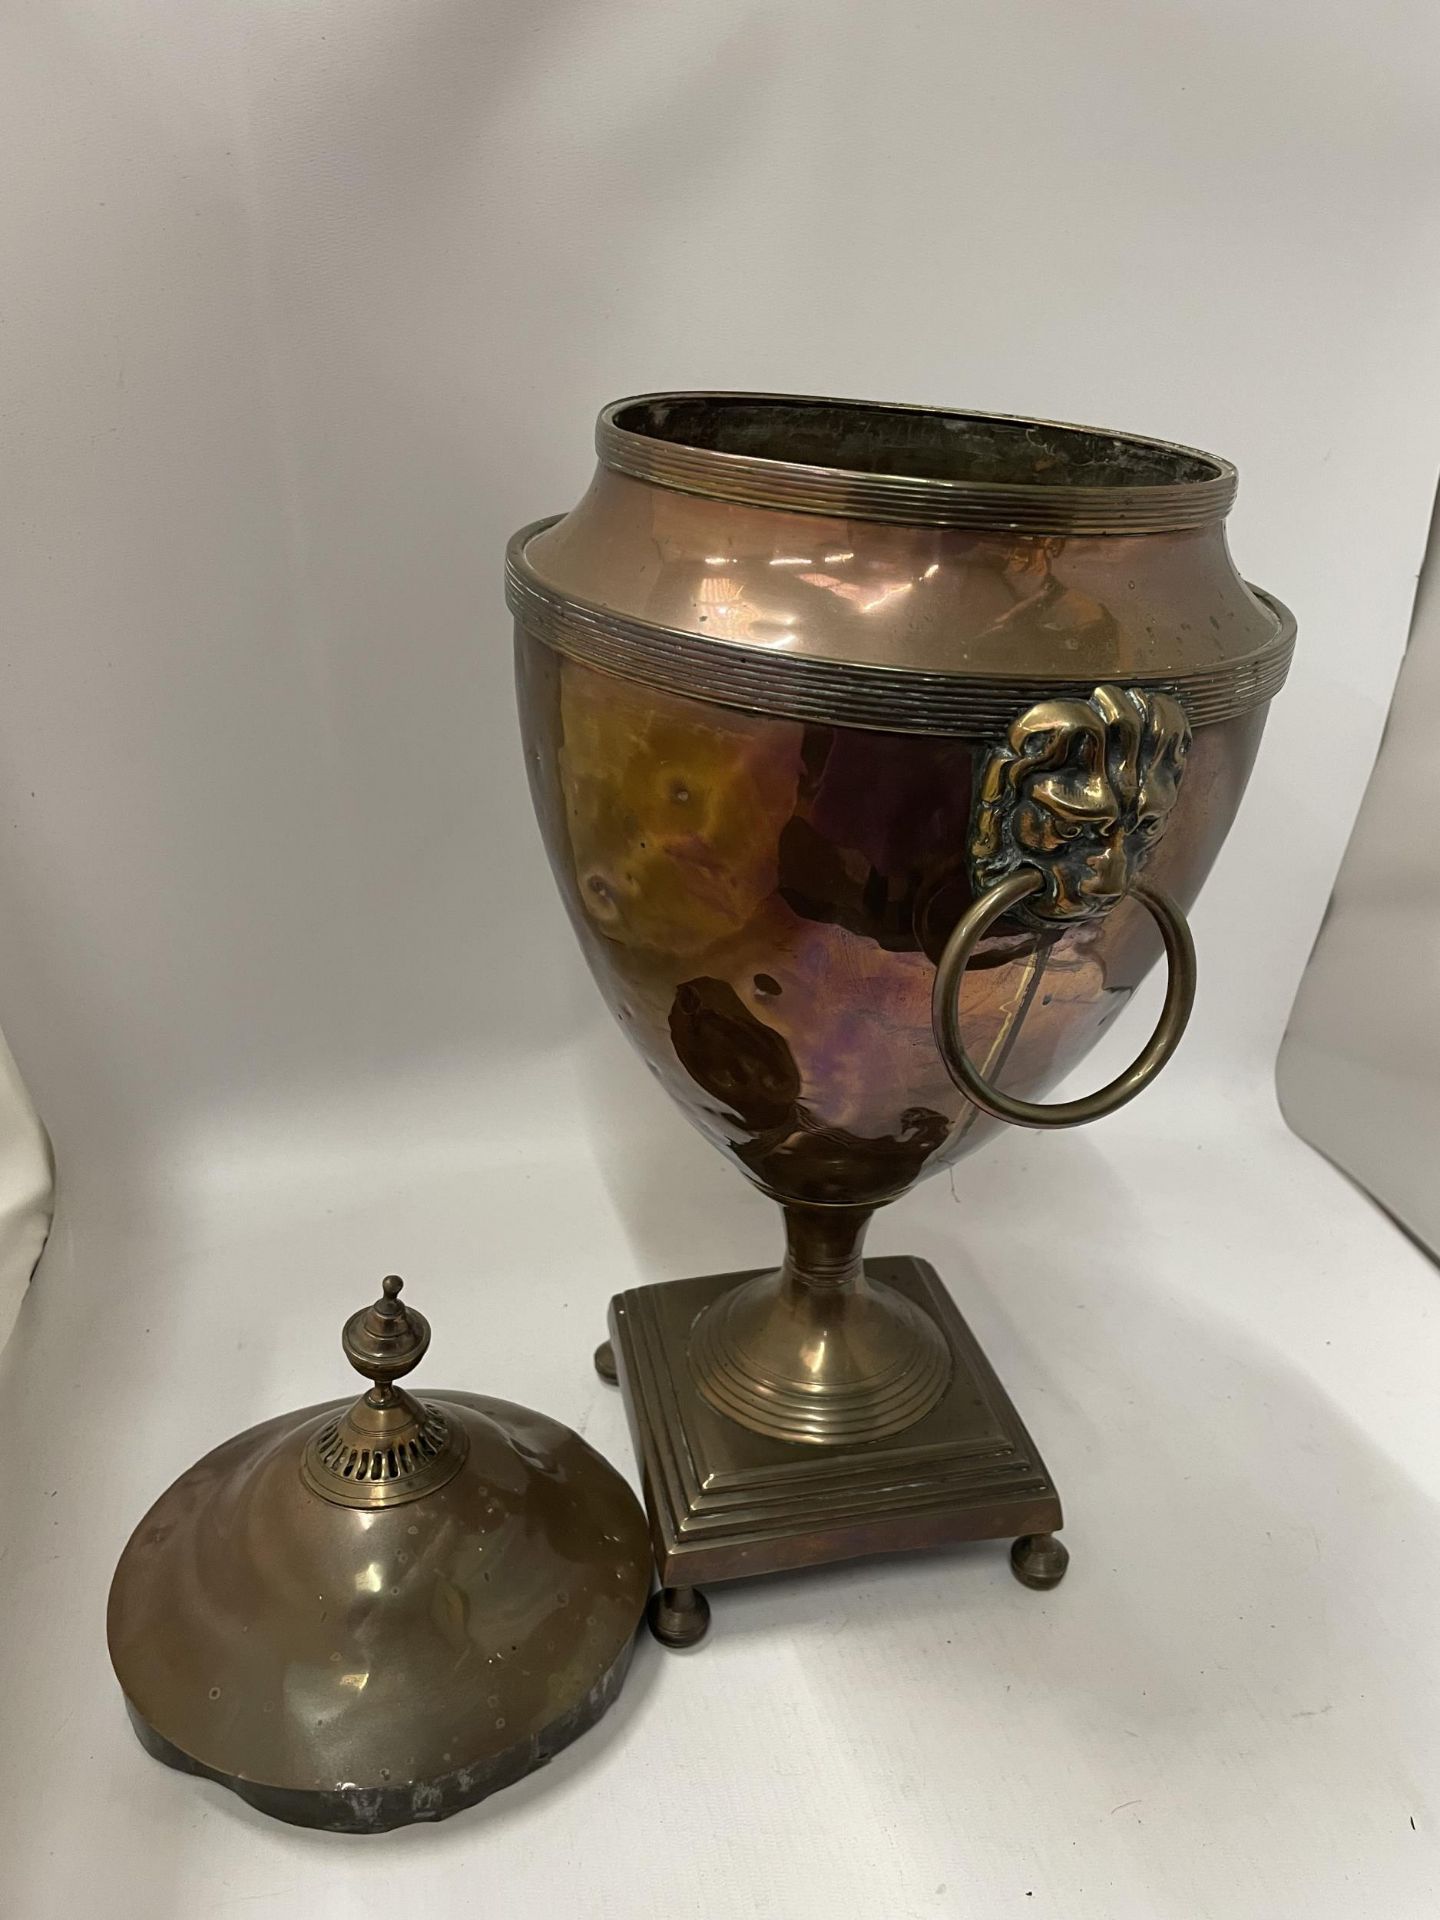 AN EARLY 20TH CENTURY COPPER SAMOVAR WITH LION DESIGN HANDLES - Image 3 of 4